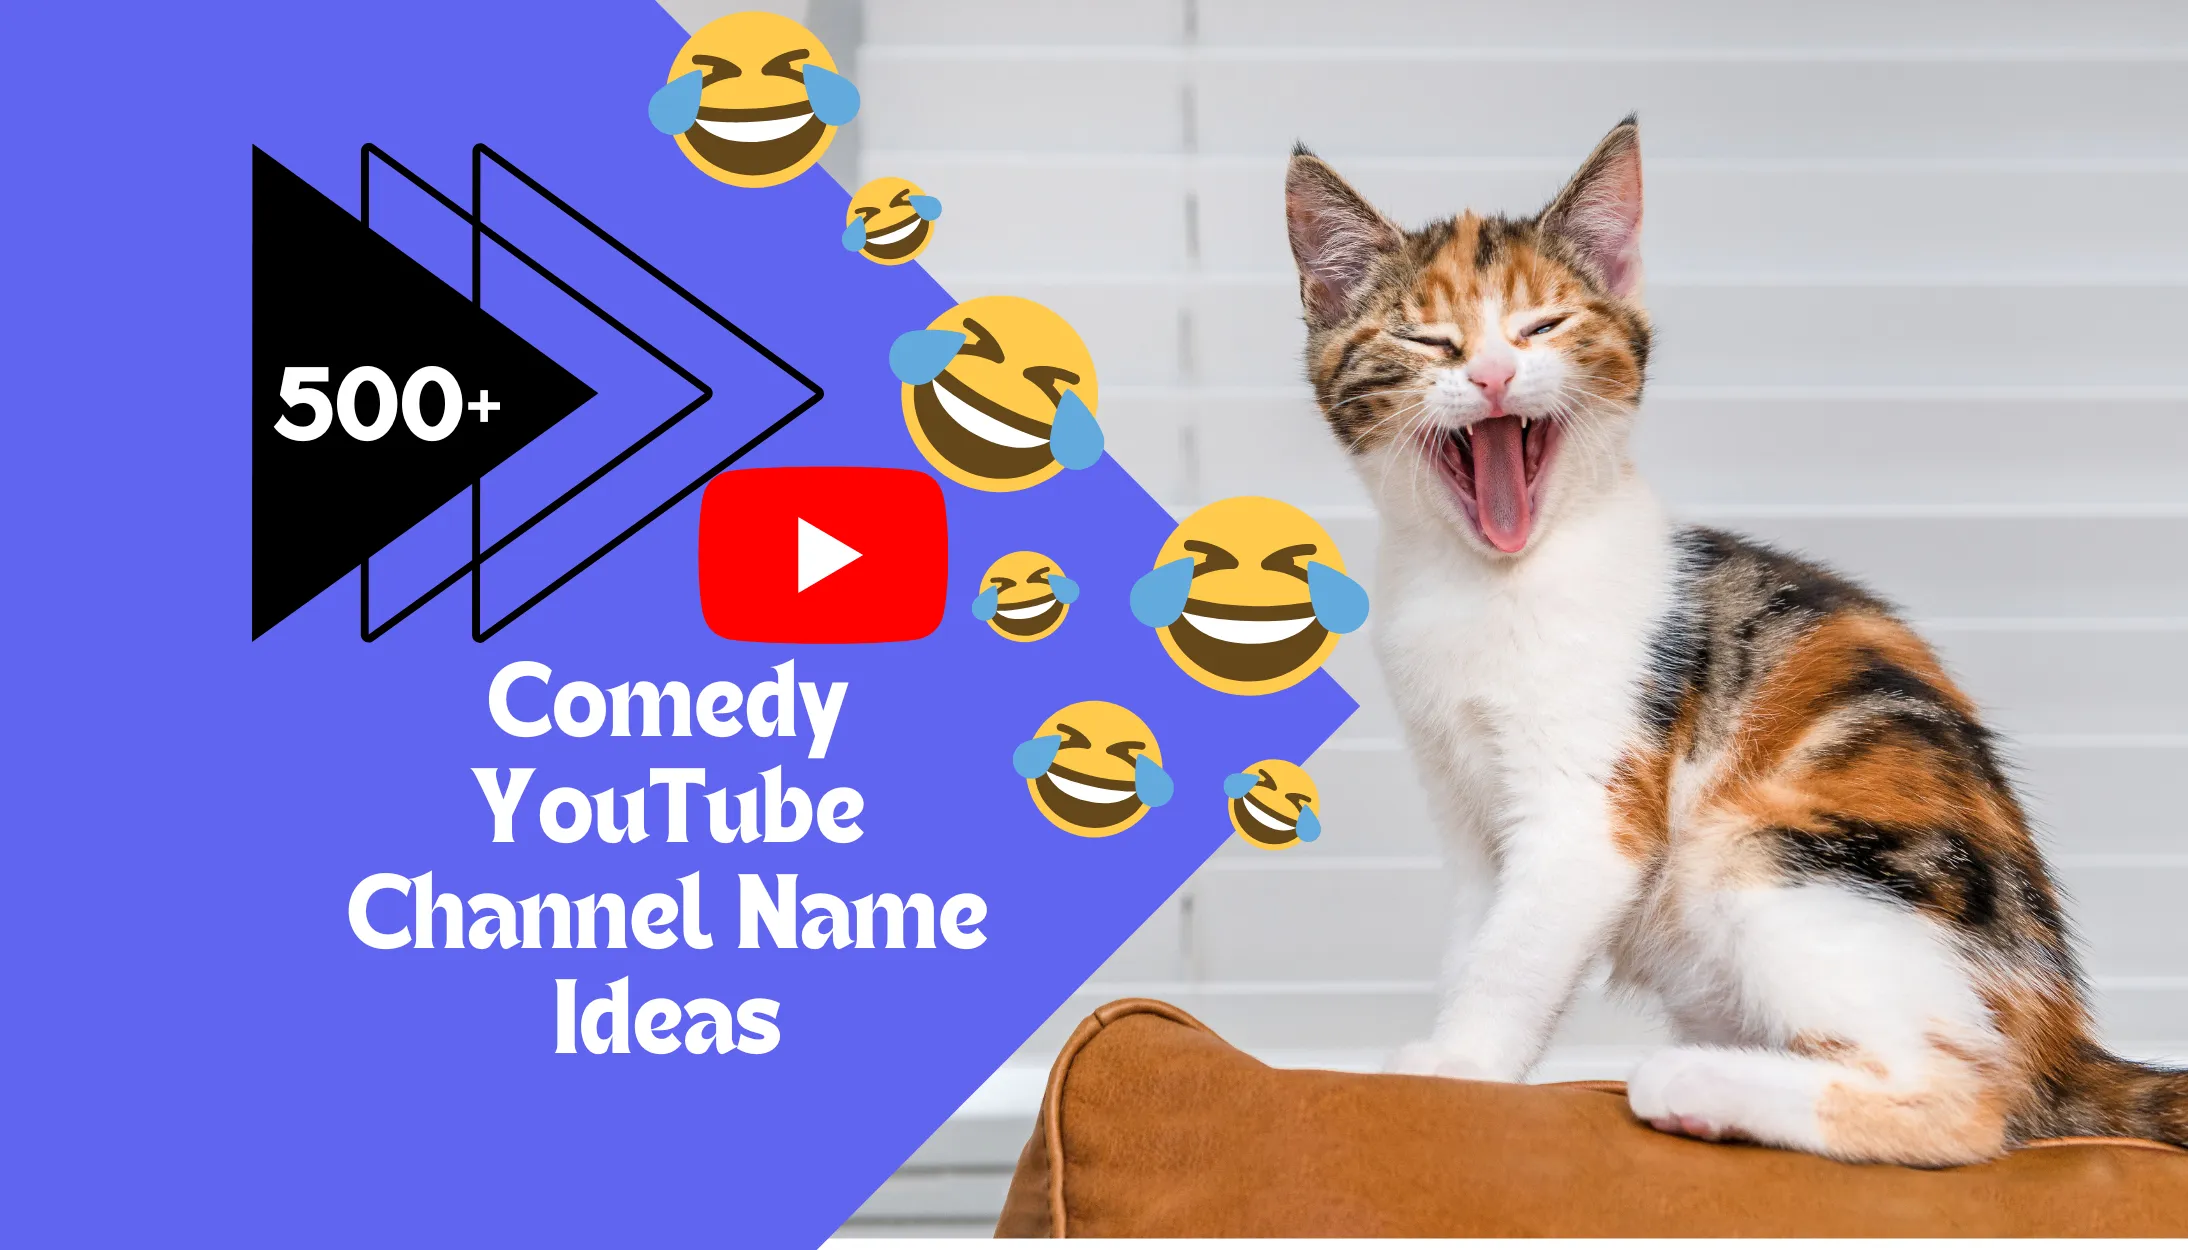 Comedy YouTube Channel Name Ideas